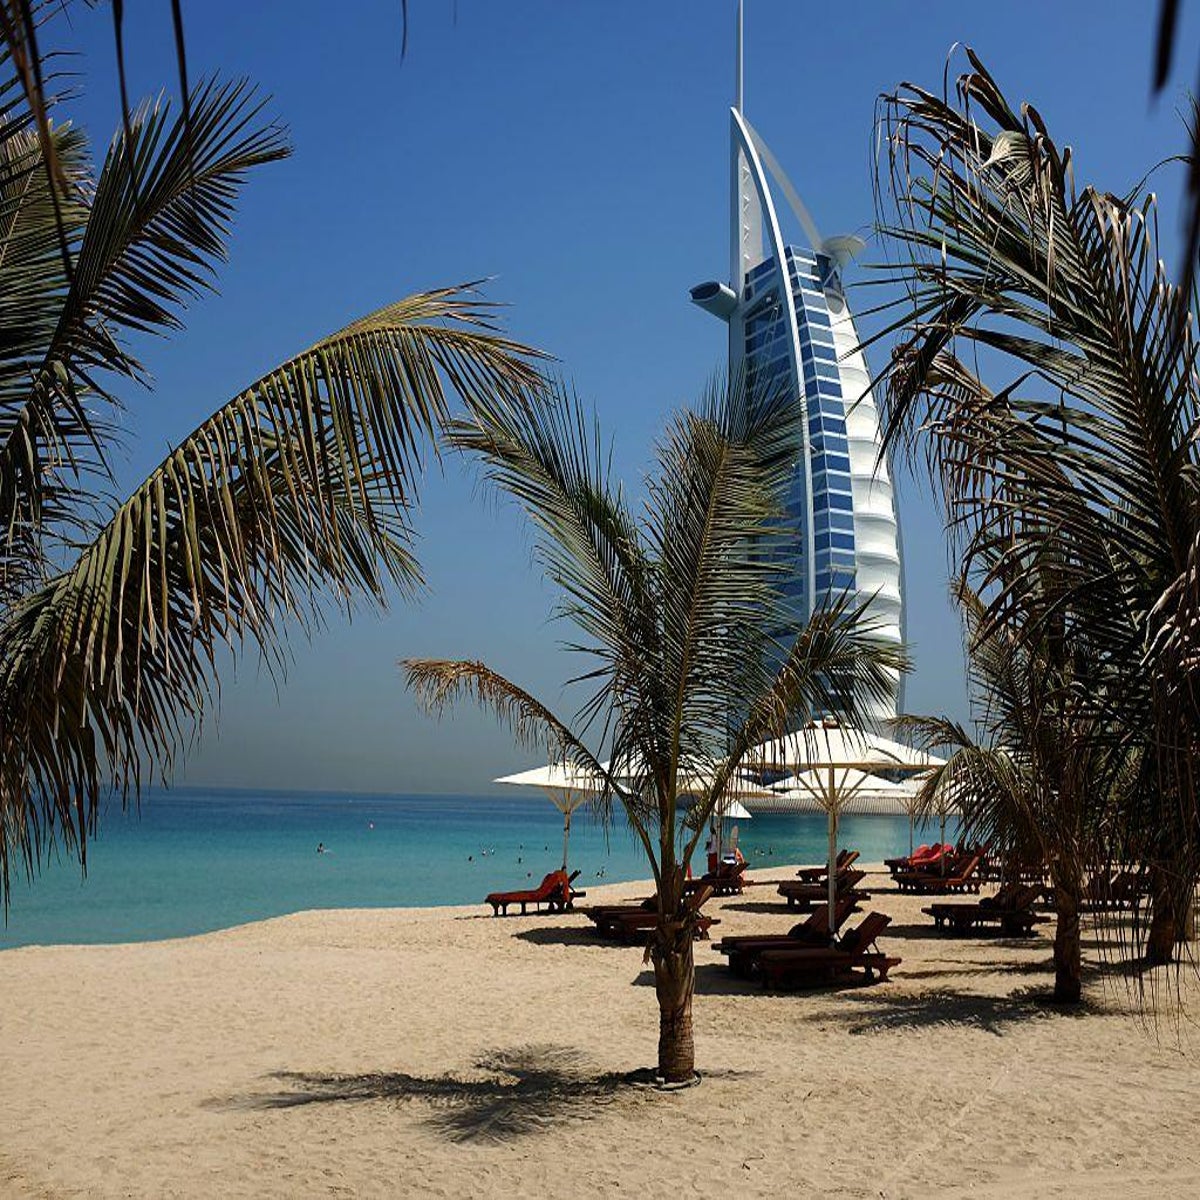 Old Topless Beach - What not to do in Dubai as a tourist | The Independent | The Independent